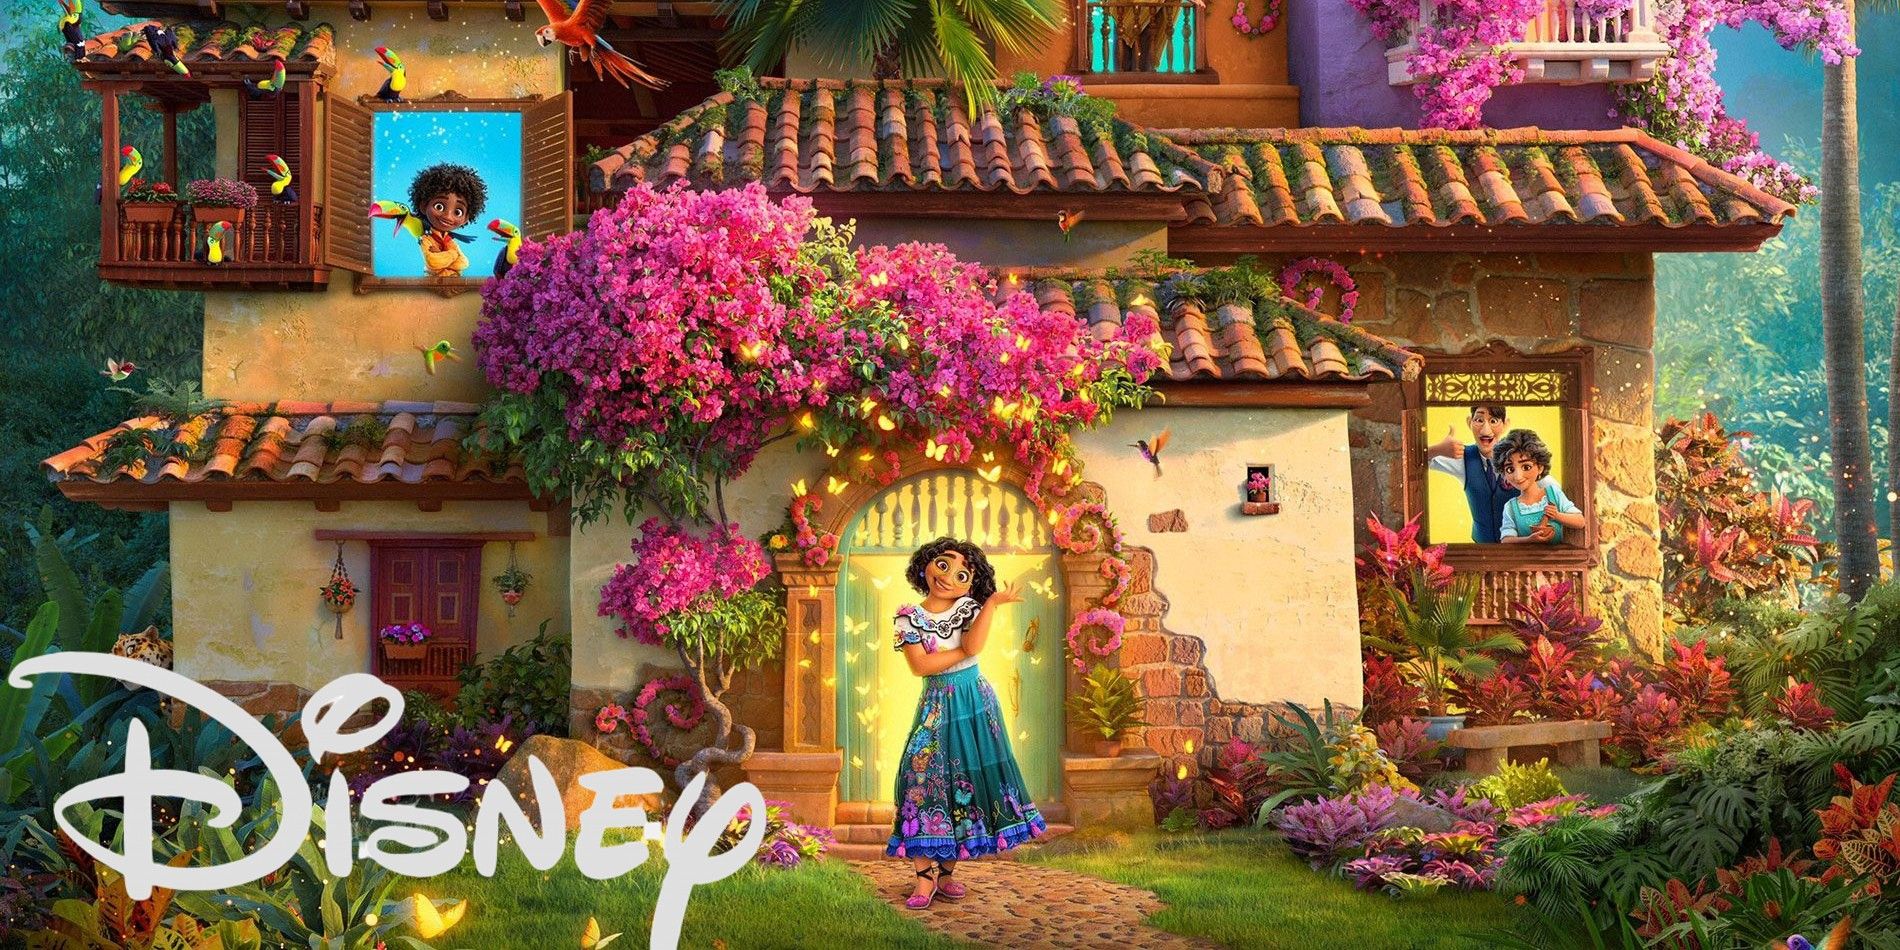 Encanto' Became a Word-of-Mouth Hit on Disney+ After Theaters: Data